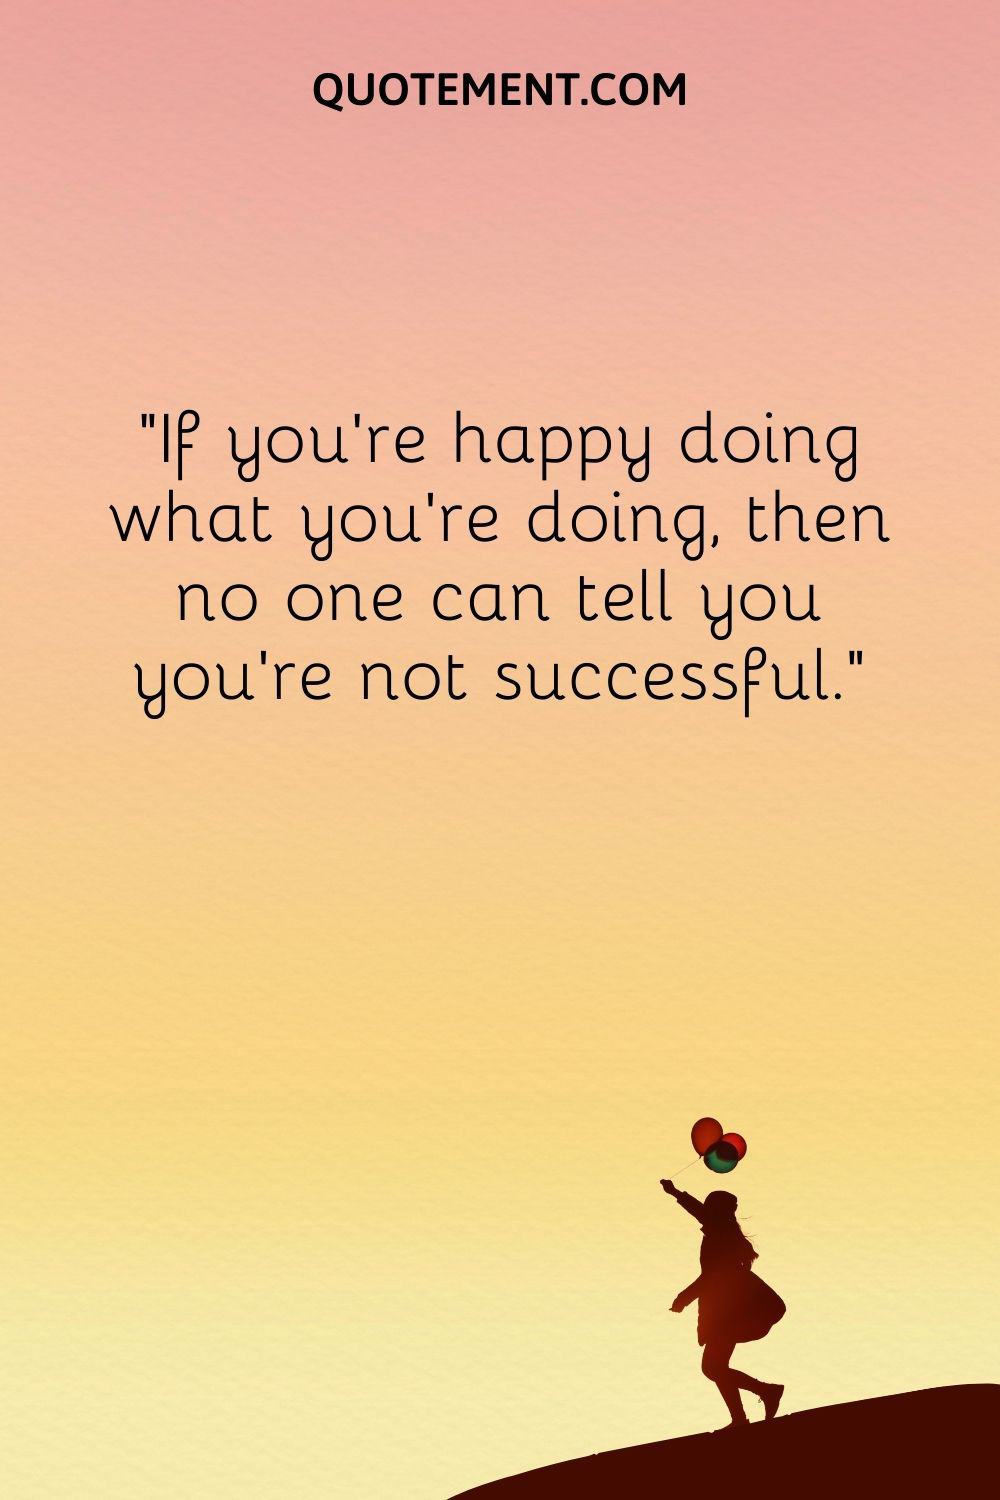 If you’re happy doing what you’re doing, then no one can tell you you’re not successful